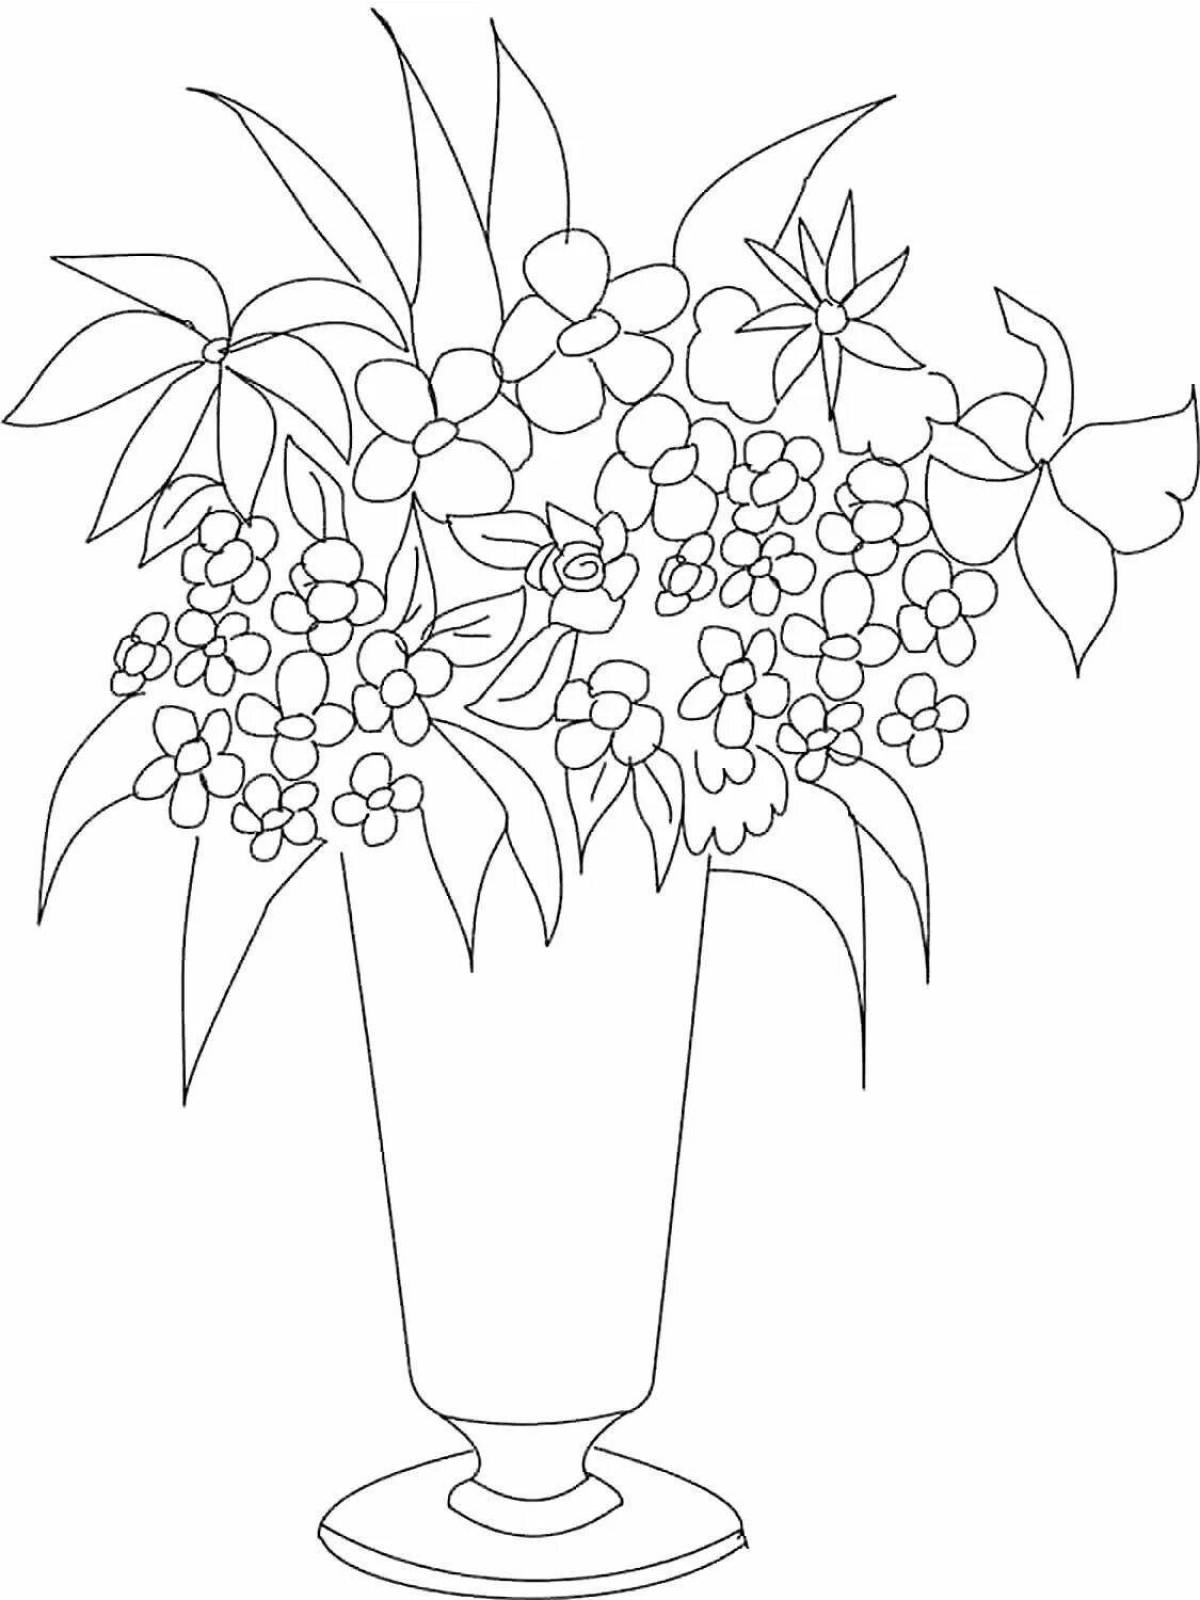 Fun coloring flowers in a vase